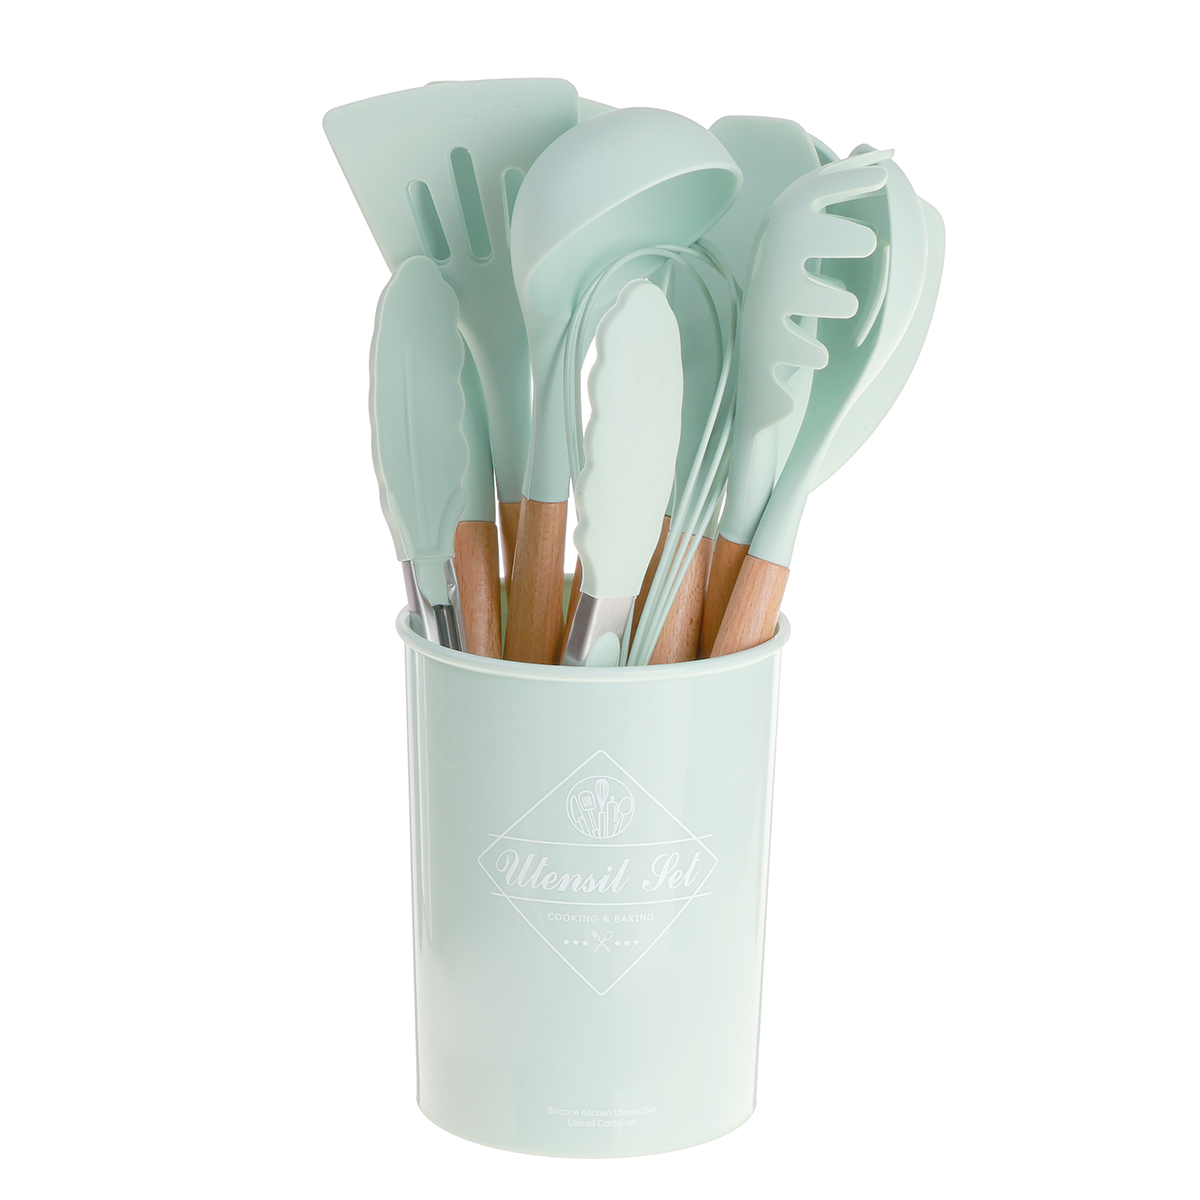 12-Pcs-Tableware-Set-Silicone-Wooden-Handle-Flatware-Spoon-Tongs-Whisk-Brush-with-Storage-Box-Outdoo-1812163-10